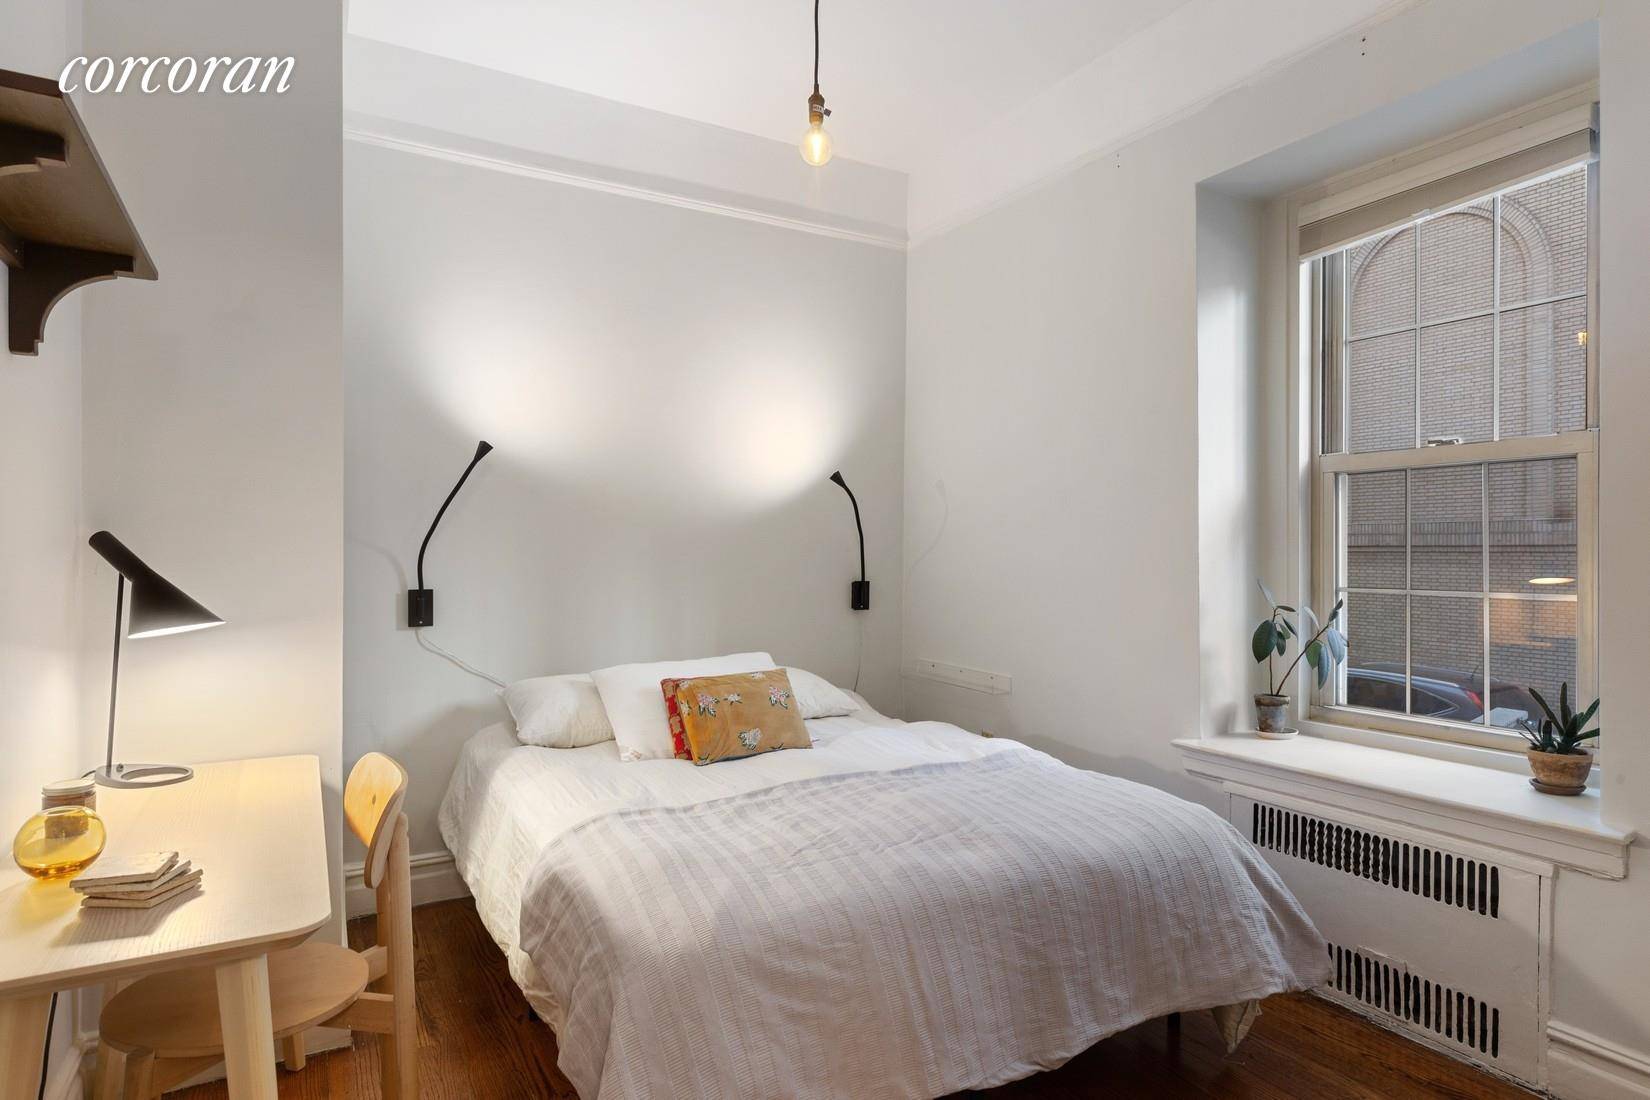 The sun drenched, corner two bedroom is nestled perfectly in the alluring neighborhood of Brooklyn Heights.